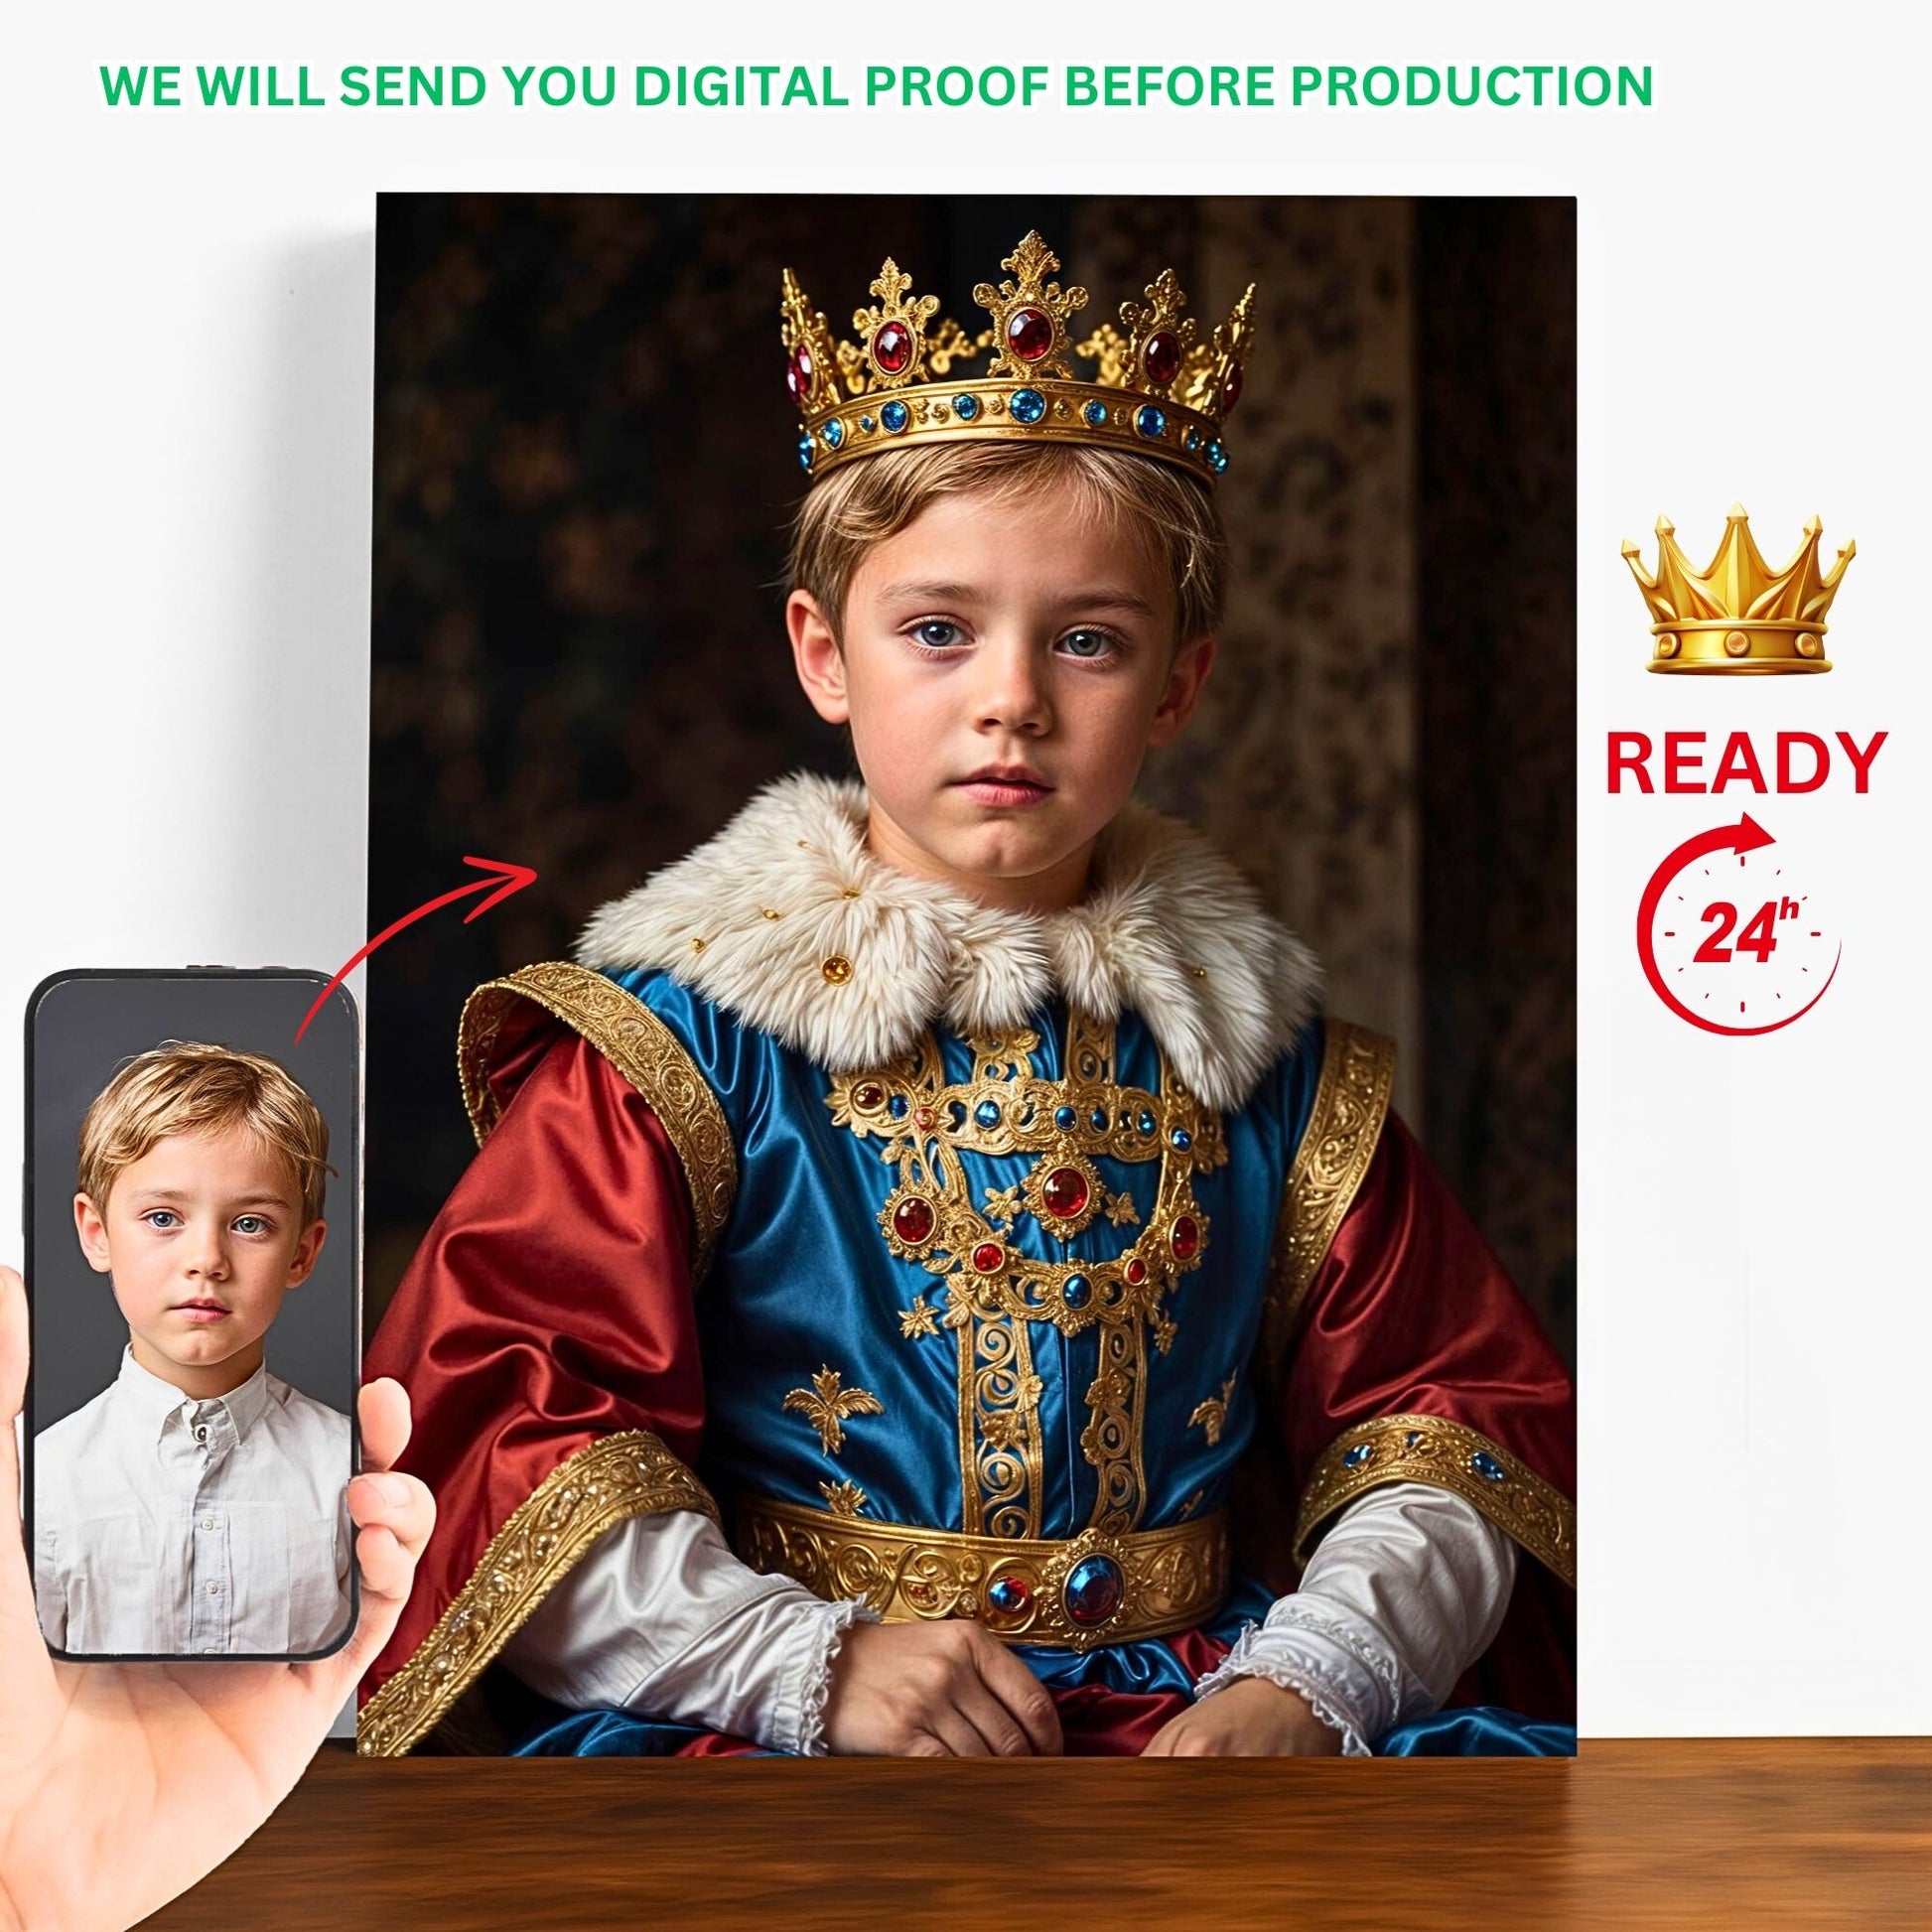 Create a regal tribute with our Custom Kid Royal Portrait service. Personalized portraits of your little King, ideal for Birthday gifts and kids' room decor. Capture the charm of royal heritage with bespoke Renaissance-style portraits crafted from your favorite photos.